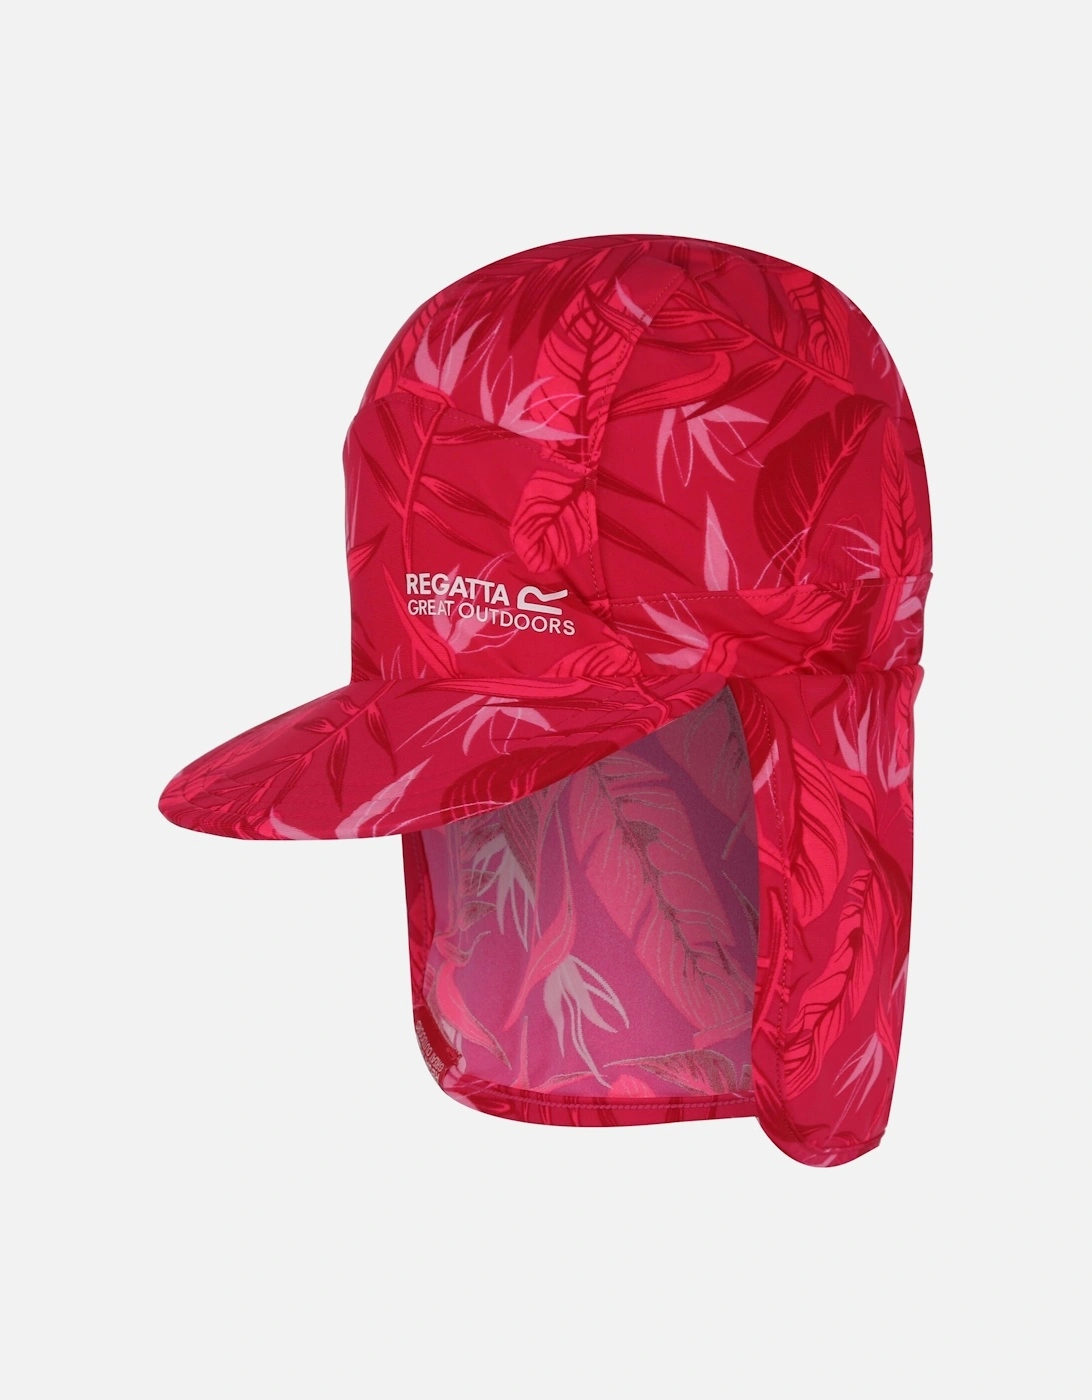 Great Outdoors Childrens/Kids Sun Protection Cap